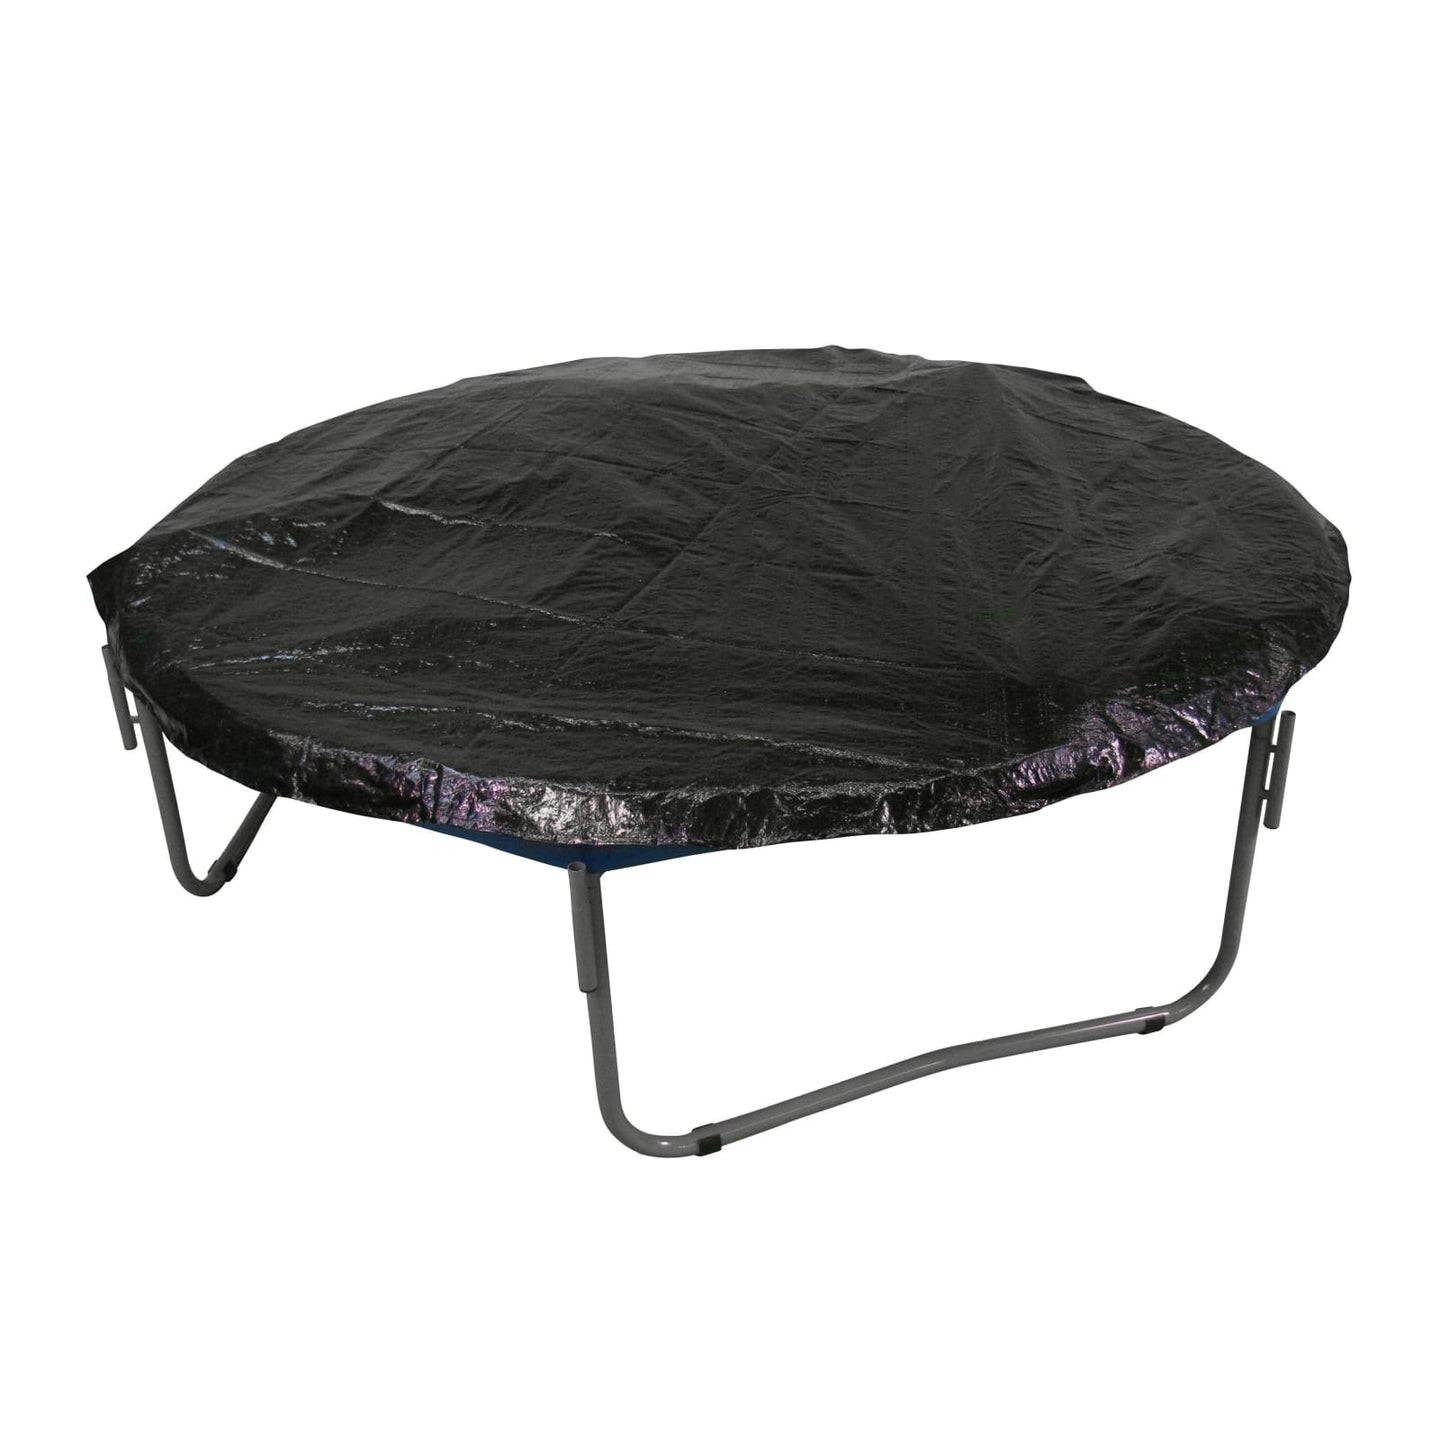 Upper Bounce Economy Trampoline Weather Protection Cover Fits For 11 Ft. Round Frames - Black - Trampoline Accessories